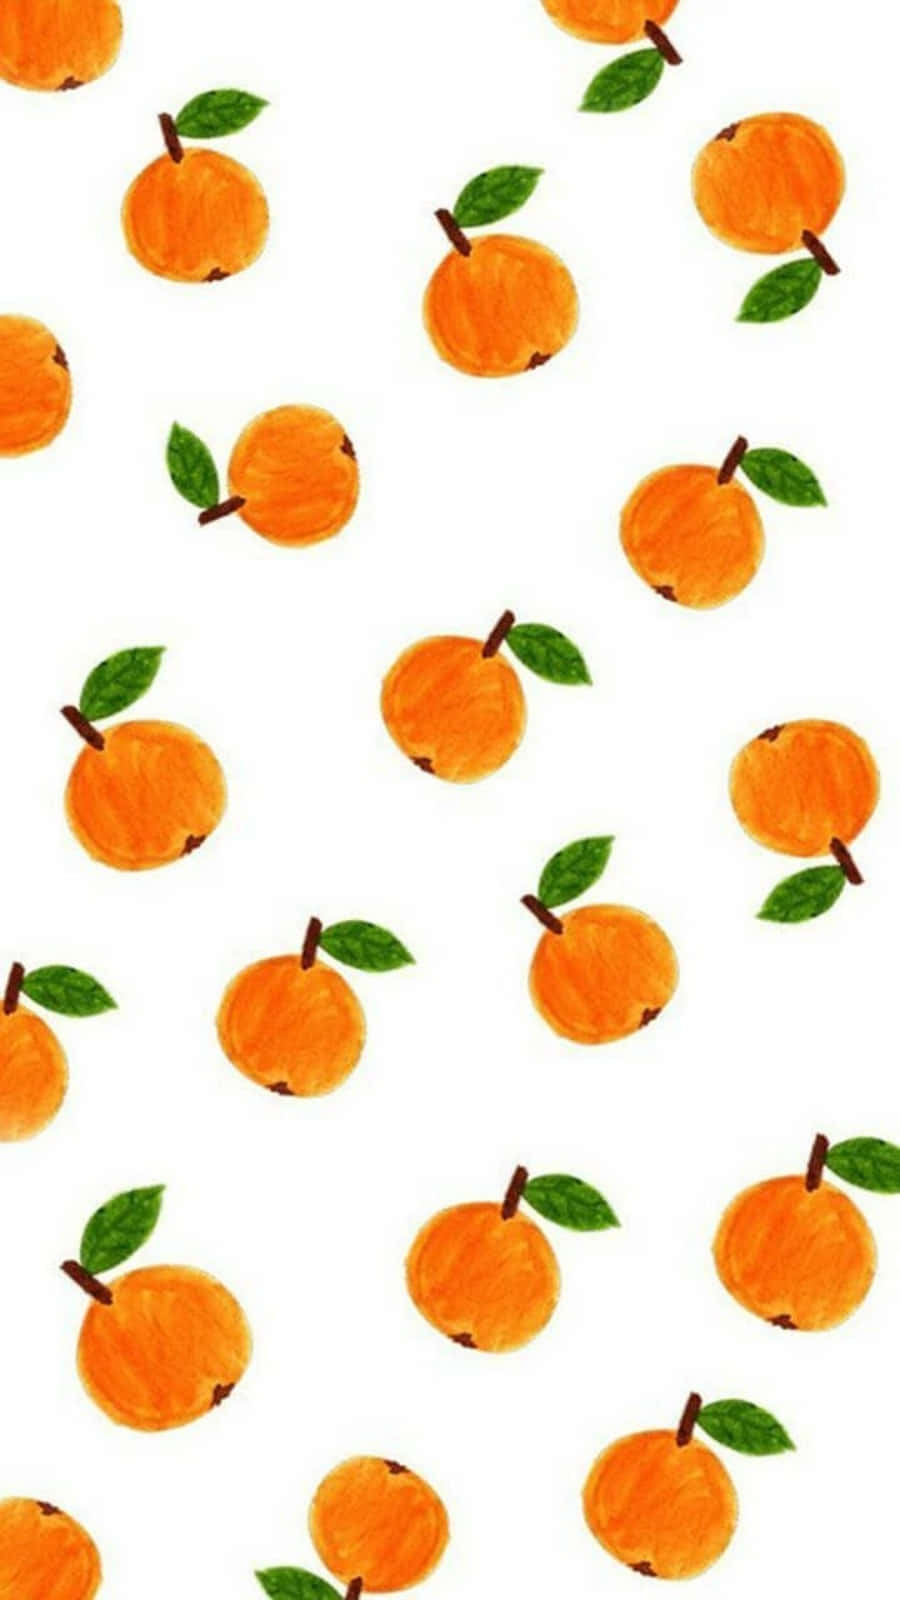 Cute Orange With Stems And A Leaf Wallpaper